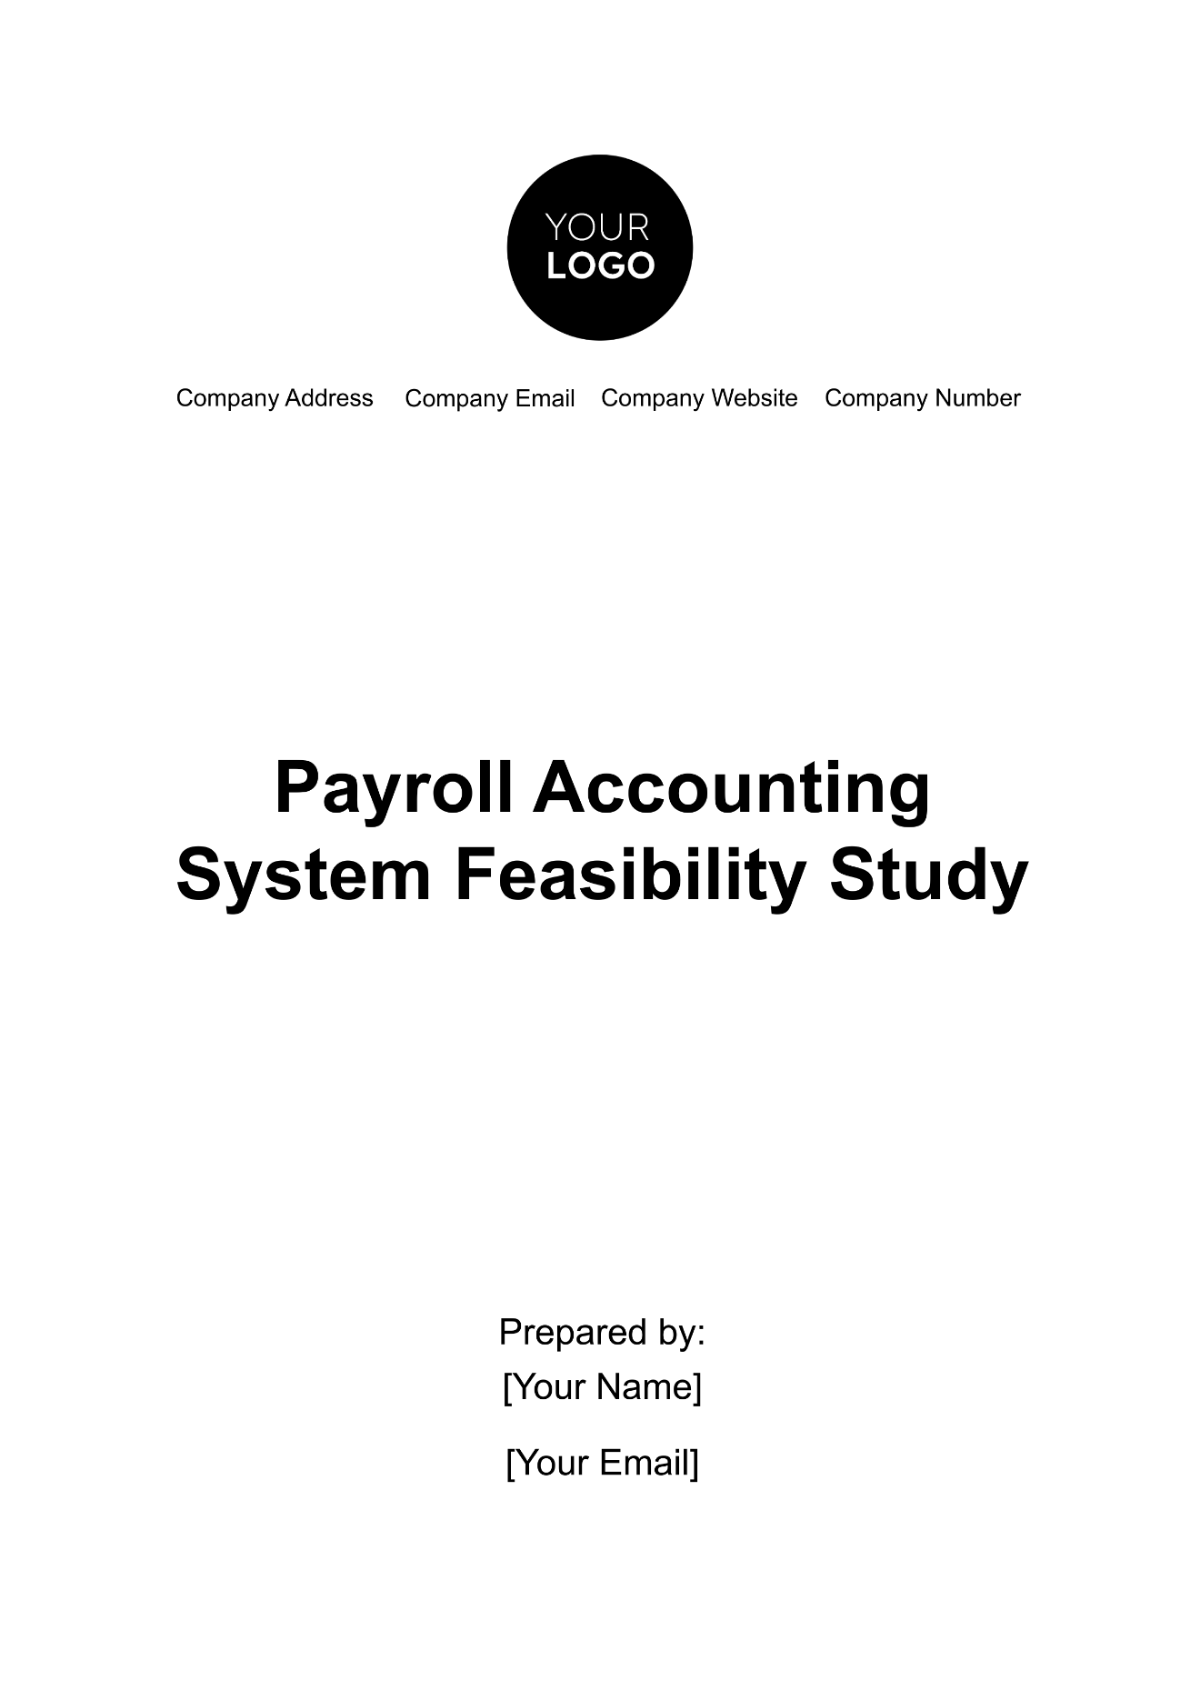 Payroll Accounting System Feasibility Study Template